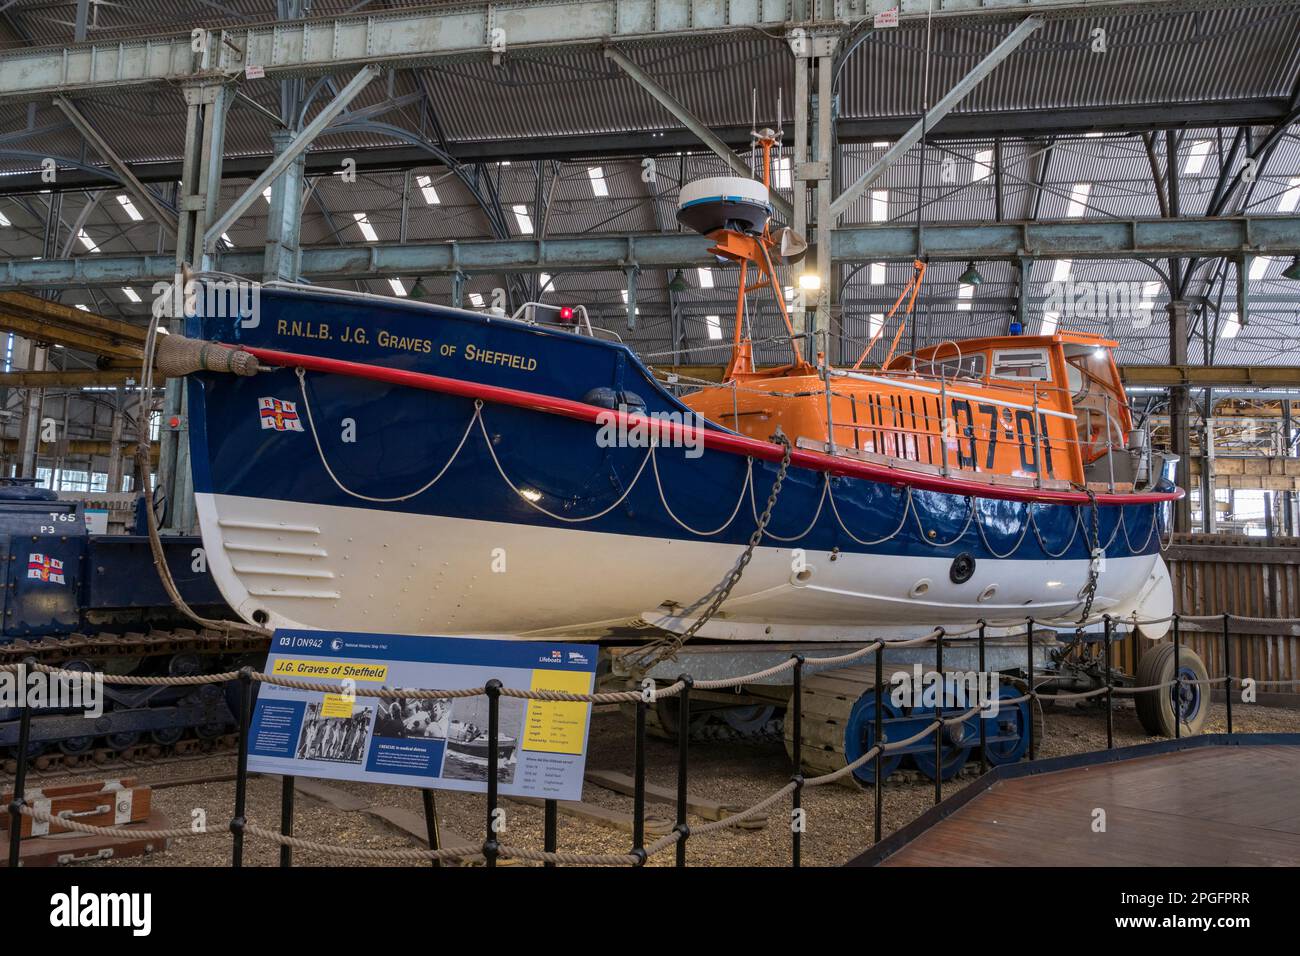 An Oakley Class lifeboat (37-01) 'JG Graves of Sheffield' in the RNLI Historic Lifeboat Collection, Historic Dockyard Chatham, Kent, UK. Stock Photo